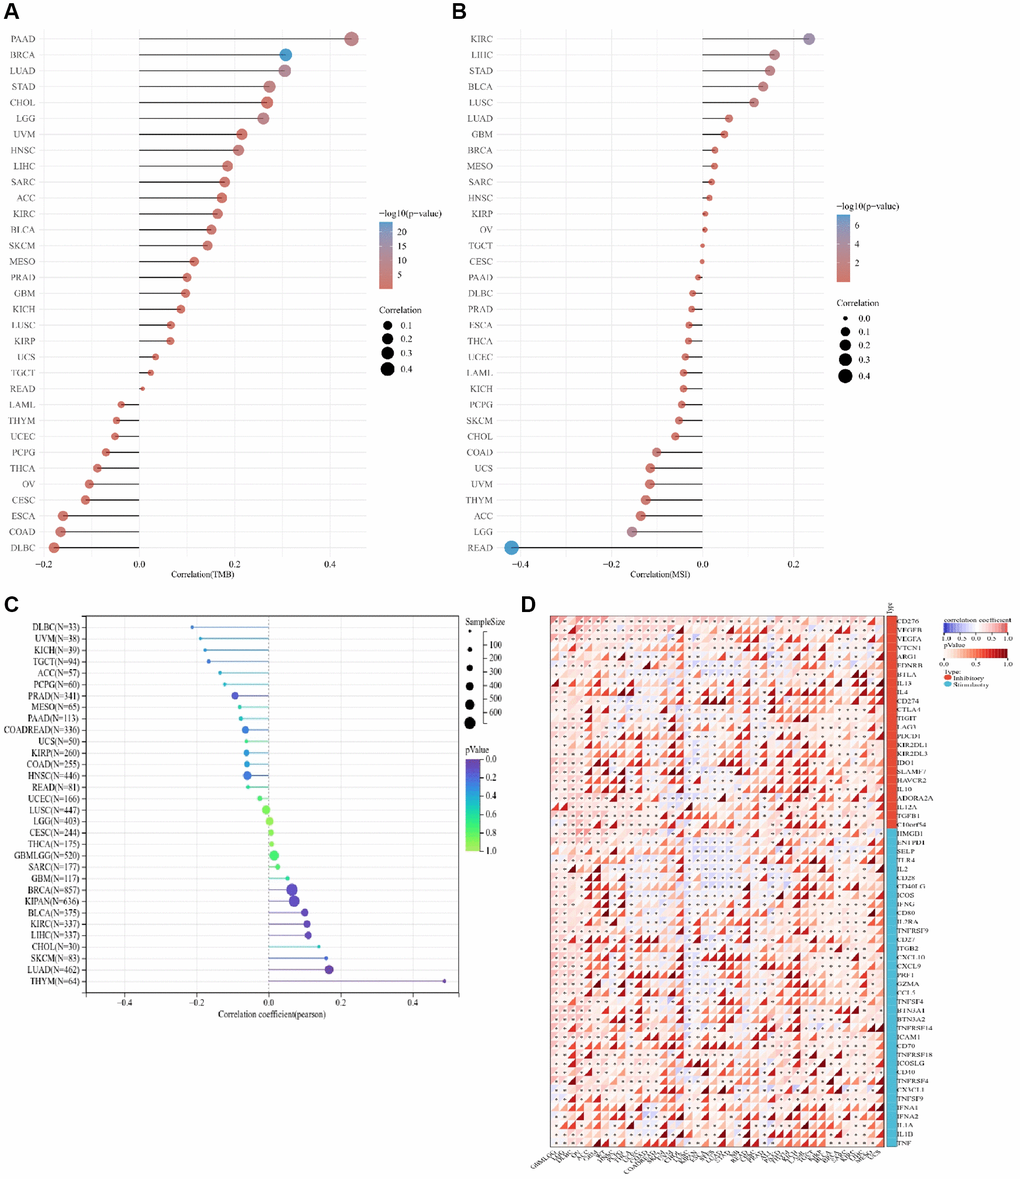 Correlation analysis between ALG3 and TMB, MSI and immune checkpoint genes in pan-cancer. (A) The correlation between ALG3 expression and TMB in pan-cancer. (B) The correlation between ALG3 expression and MSI in pan-cancer. (C) The association between ALG3 expression level and neoantigen in pan-cancer. (D) The correlation between ALG3 expression and immune checkpoint genes in pan-cancer.